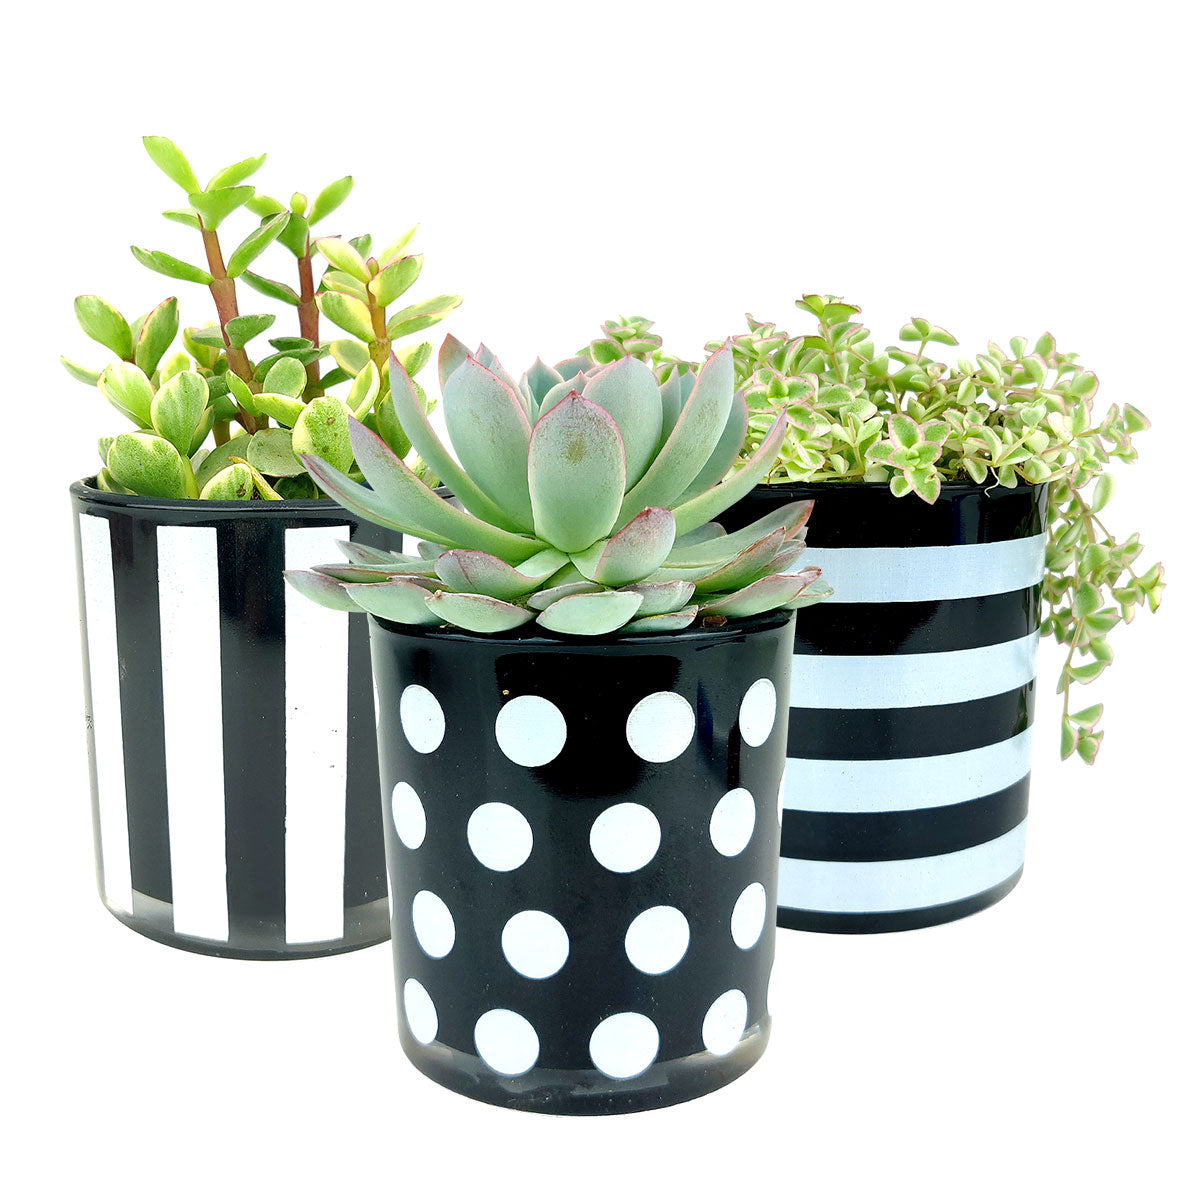 3 Pack Black and White glass pots, Pot for sale, Mini pot for succulent, Succulent pot decor ideas, Flower pot for sale, glass pots for planting, succulent gift for holiday